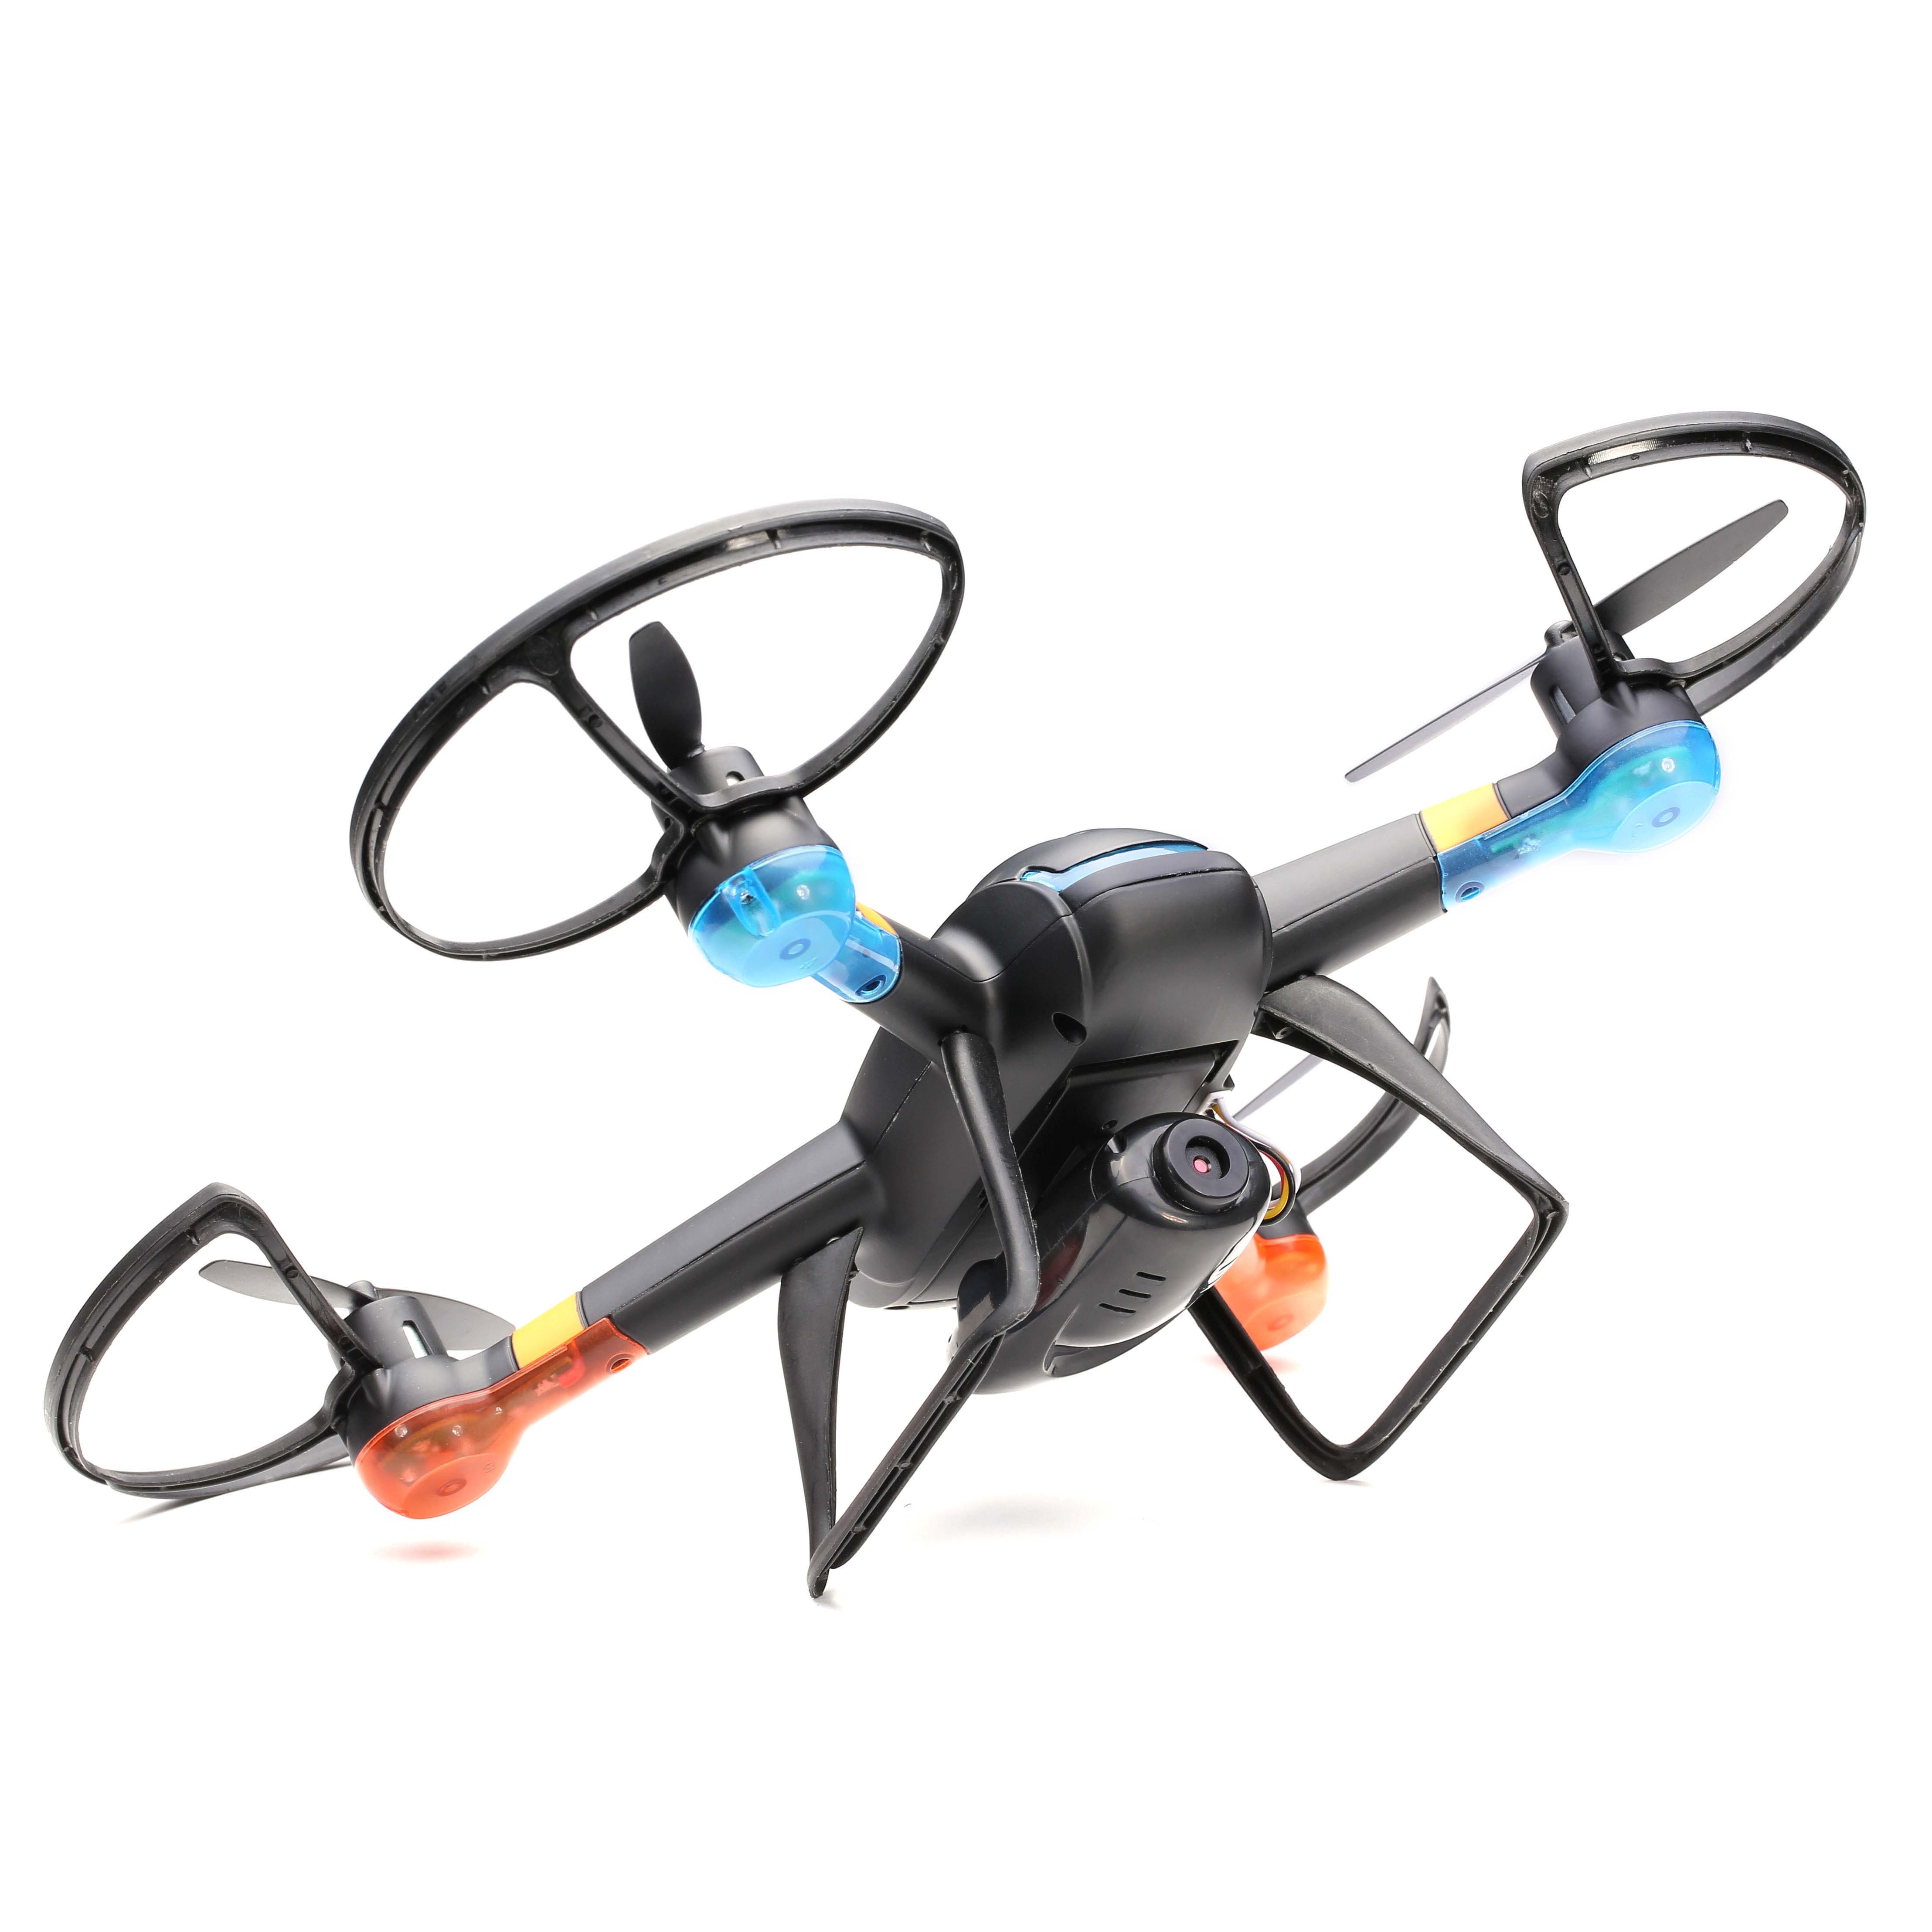 GW007-1 Upgrade DM007 With 2.0MP HD Camera 2.4G 4CH 6 Axis One Key Return RC Quadcopter